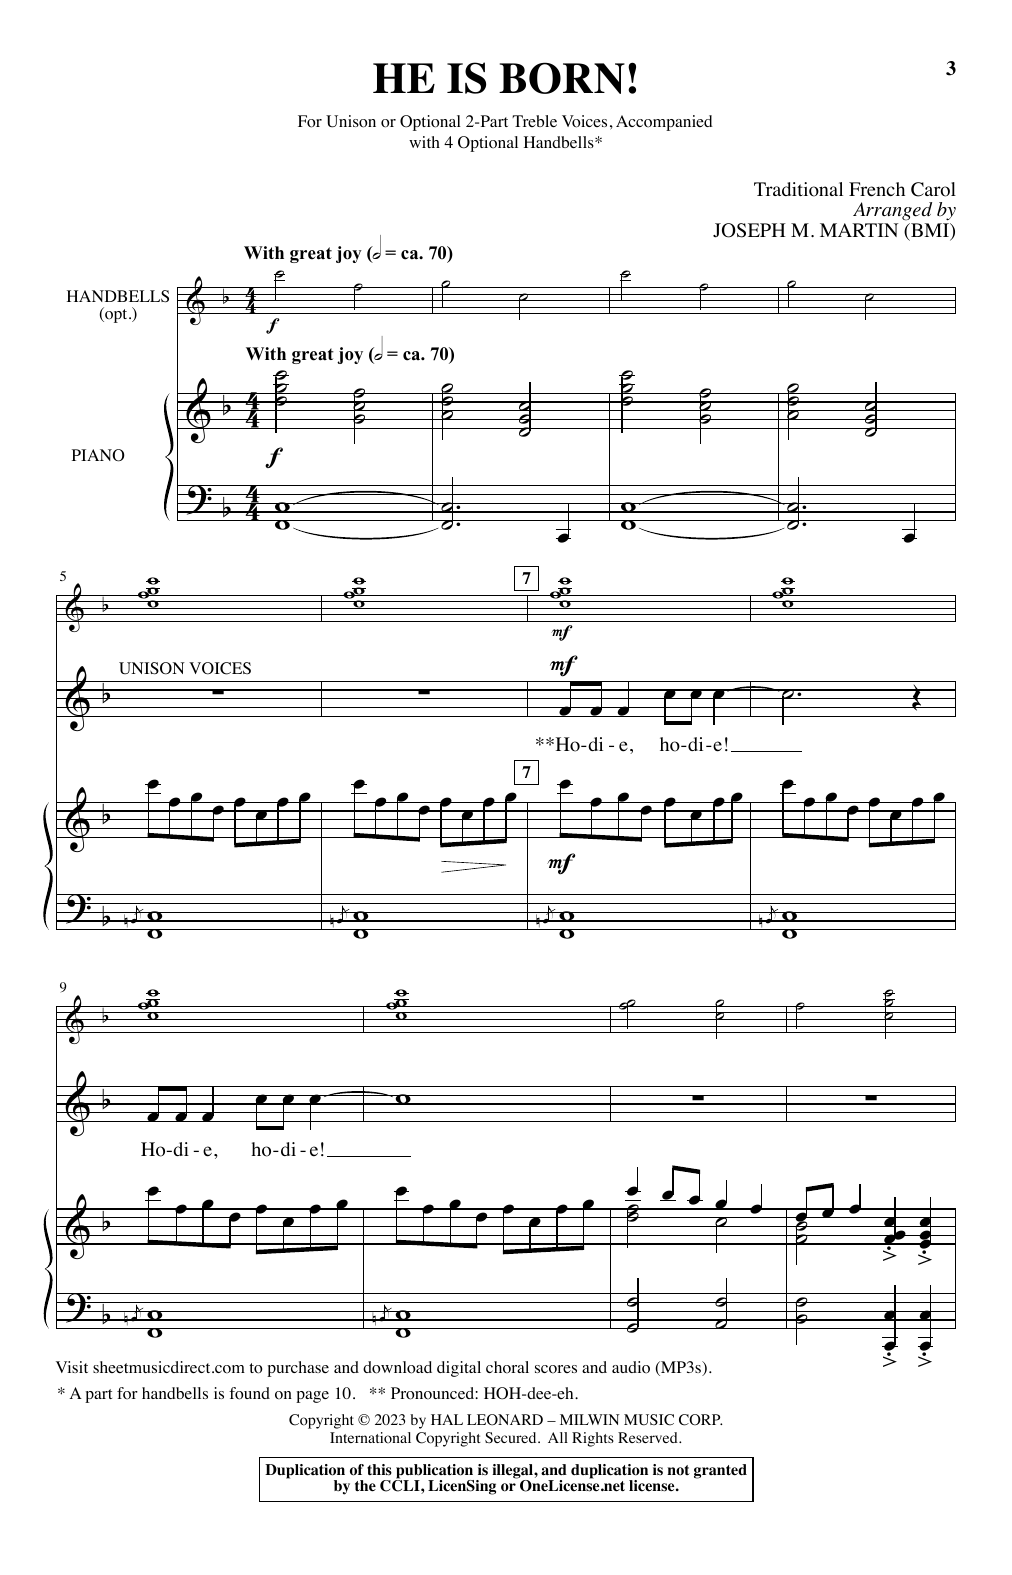 Download Traditional French Carol He Is Born! (arr. Joseph M. Martin) Sheet Music